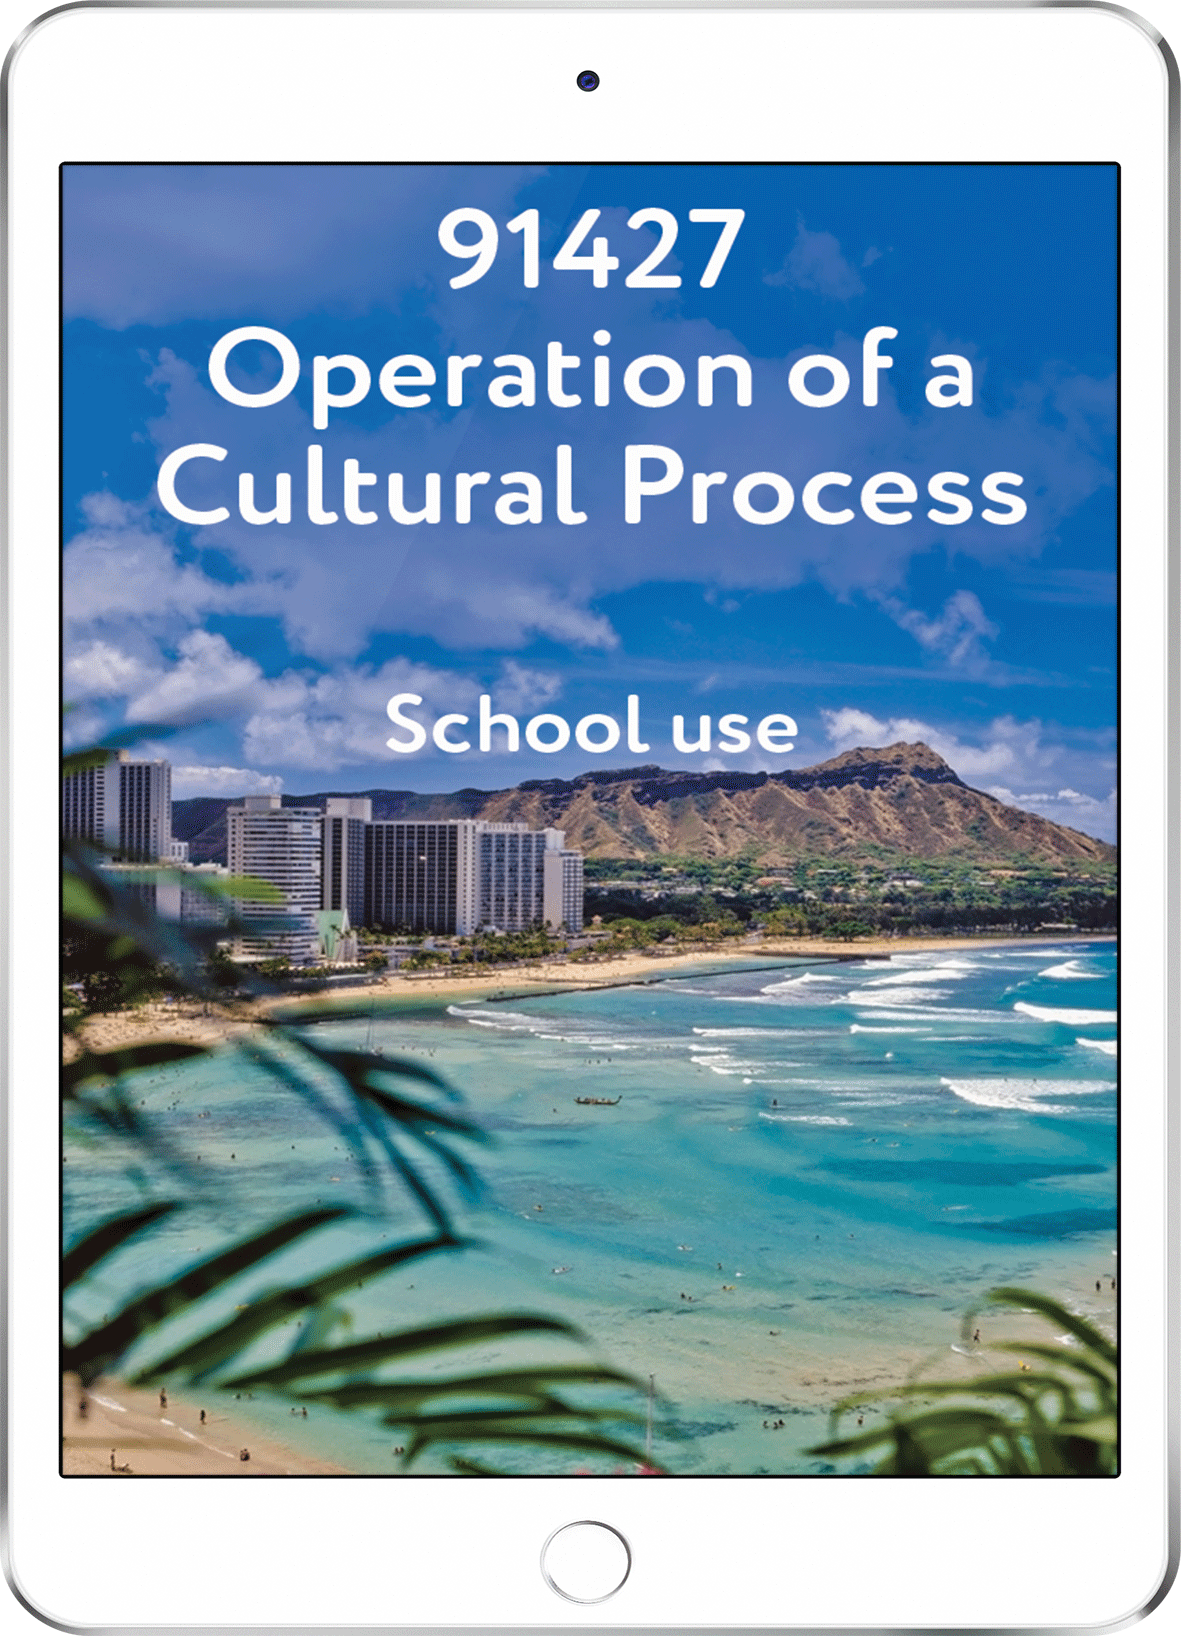 91427 Operation of a Cultural Process - School Use